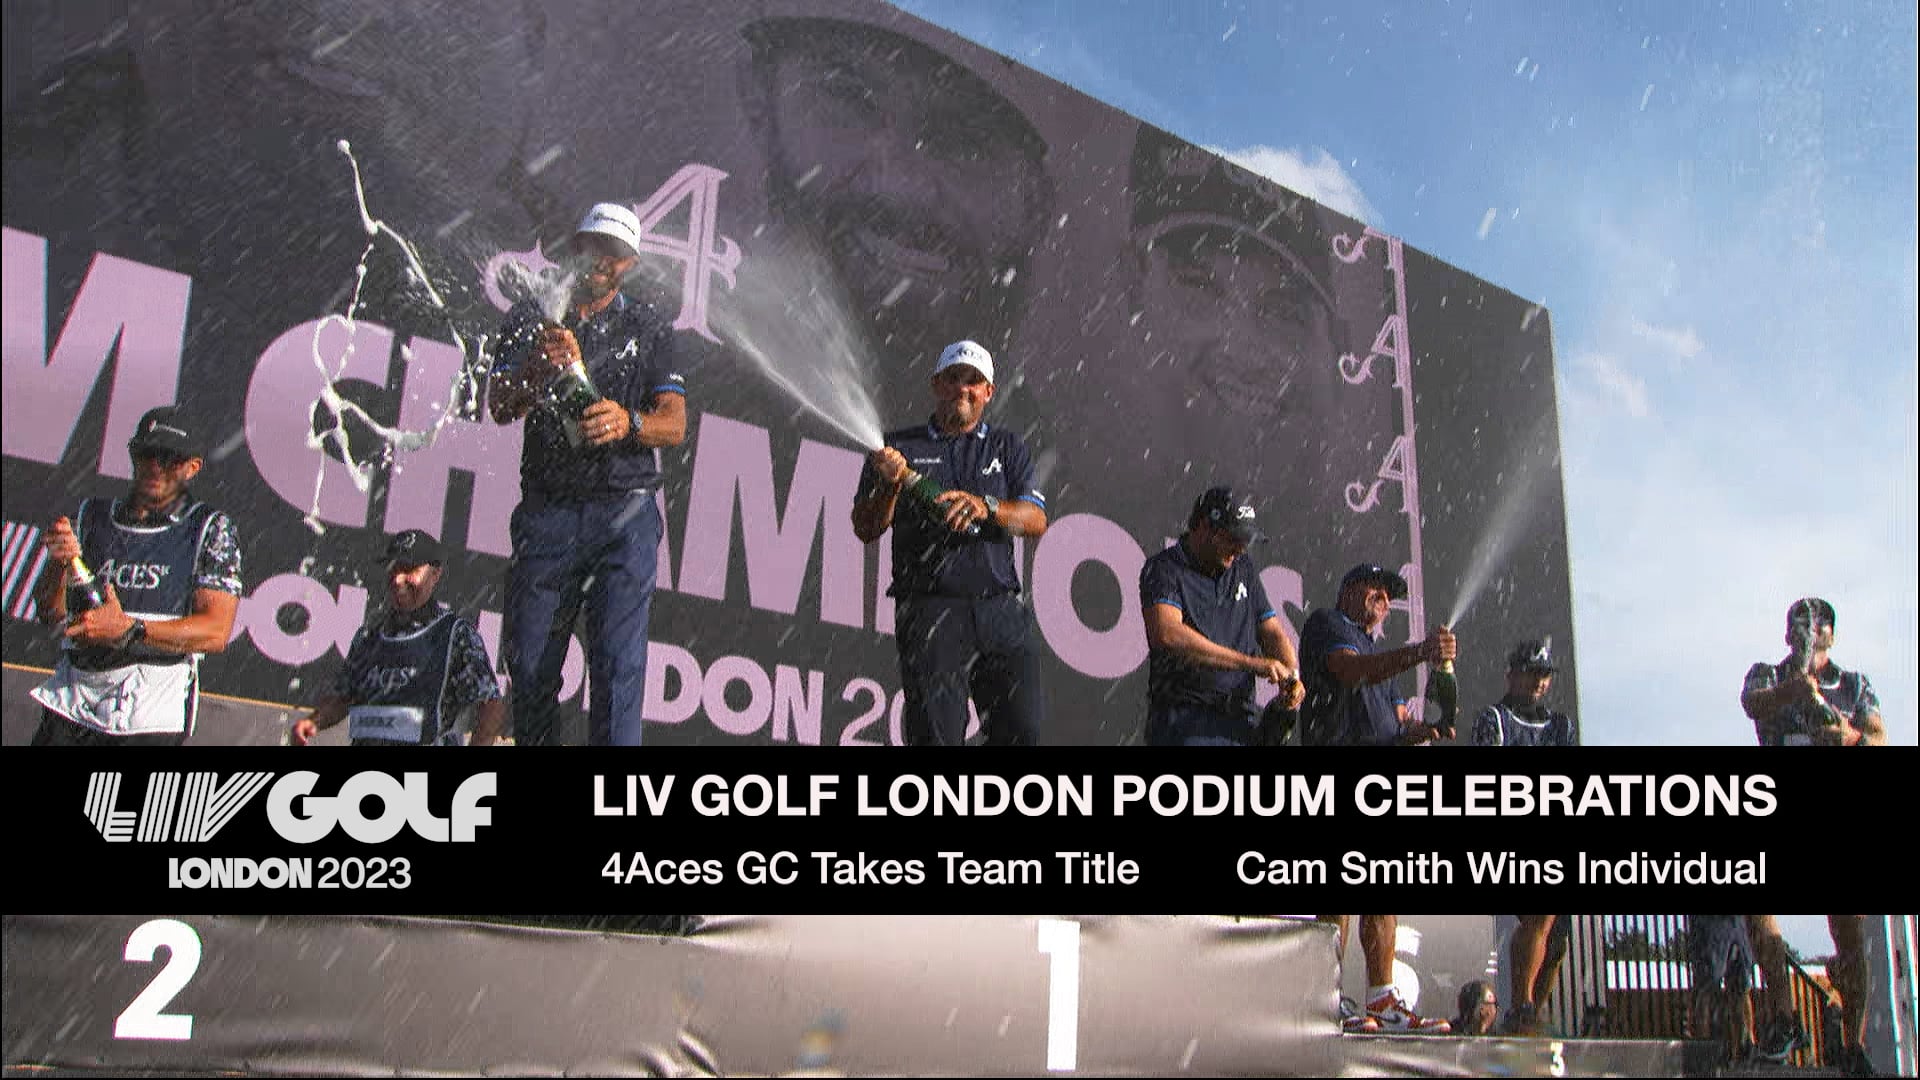 LIV Golf London Podium Celebration as 4Aces GC Earn Team Title and Cam Smith Wins Individual Competition on Vimeo